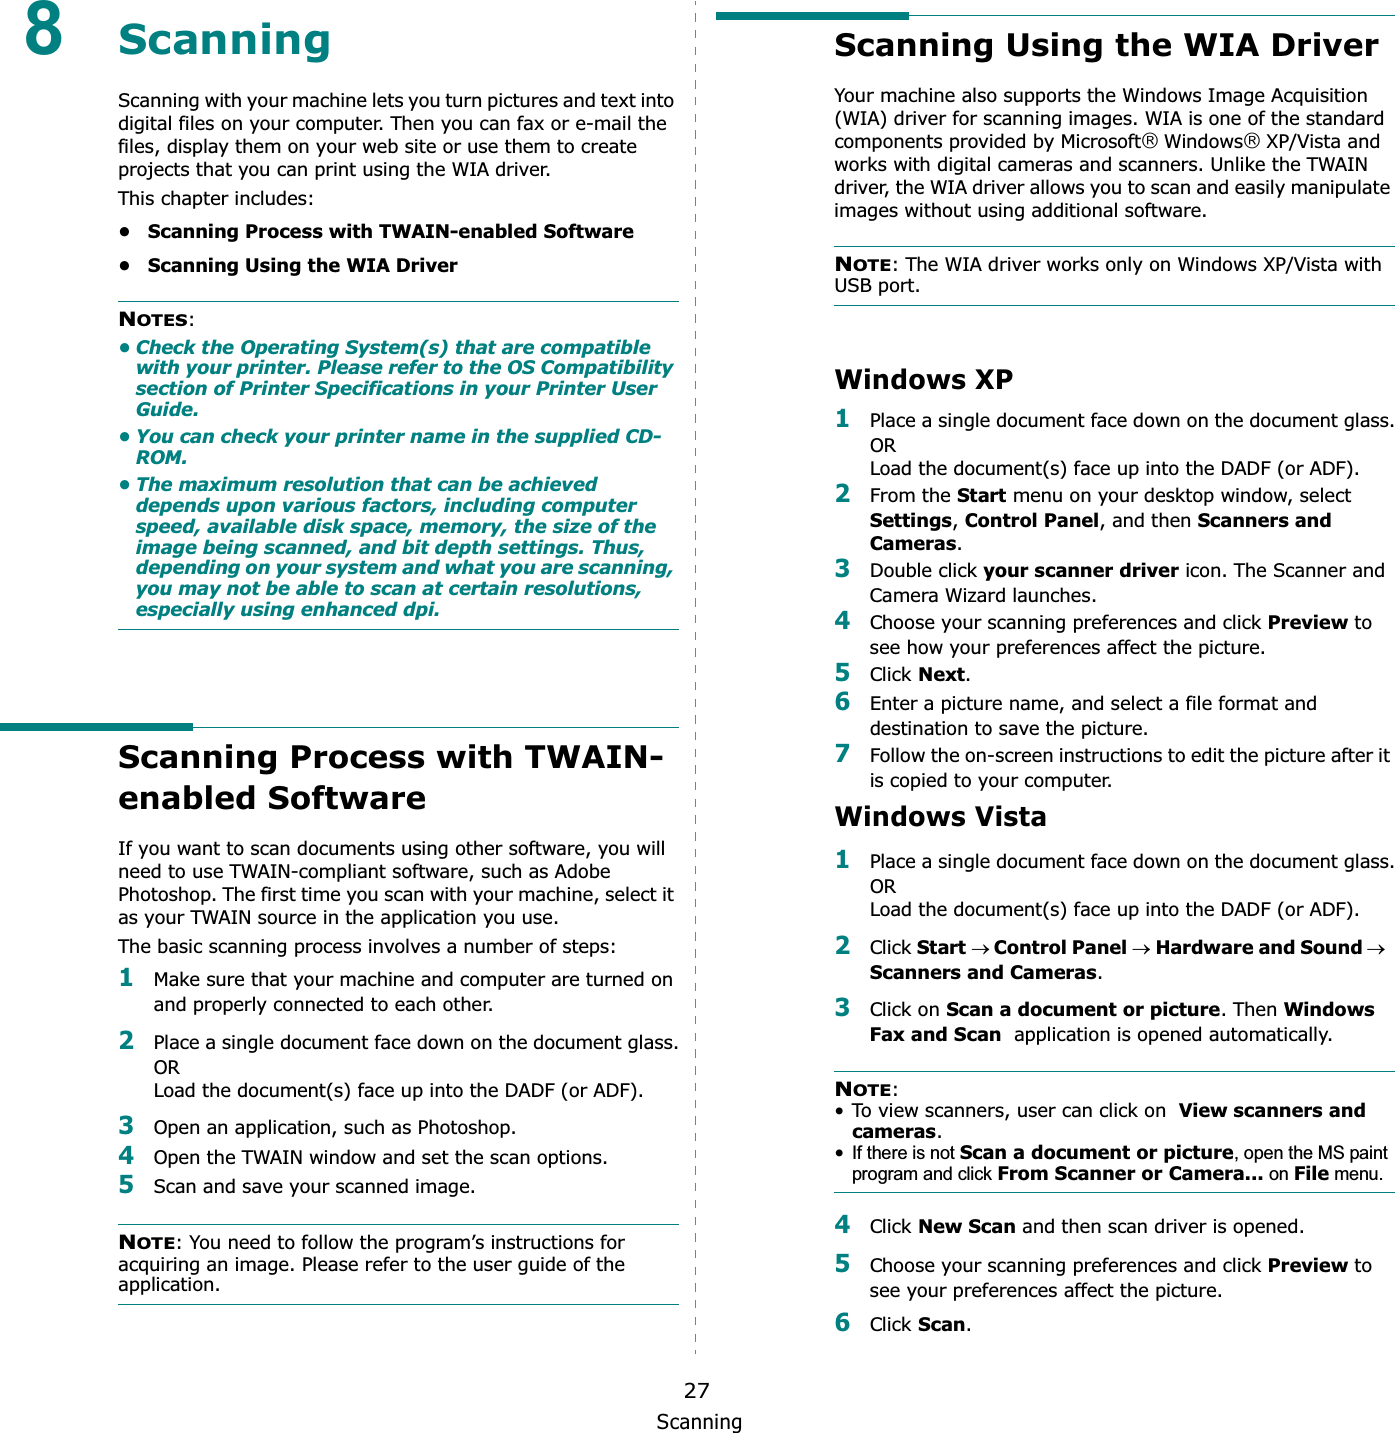 Scanning278ScanningScanning with your machine lets you turn pictures and text into digital files on your computer. Then you can fax or e-mail the files, display them on your web site or use them to create projects that you can print using the WIA driver.This chapter includes:• Scanning Process with TWAIN-enabled Software• Scanning Using the WIA DriverNOTES:• Check the Operating System(s) that are compatible with your printer. Please refer to the OS Compatibility section of Printer Specifications in your Printer User Guide.• You can check your printer name in the supplied CD-ROM.• The maximum resolution that can be achieved depends upon various factors, including computer speed, available disk space, memory, the size of the image being scanned, and bit depth settings. Thus, depending on your system and what you are scanning, you may not be able to scan at certain resolutions, especially using enhanced dpi.Scanning Process with TWAIN-enabled Software If you want to scan documents using other software, you will need to use TWAIN-compliant software, such as Adobe Photoshop. The first time you scan with your machine, select it as your TWAIN source in the application you use. The basic scanning process involves a number of steps:1Make sure that your machine and computer are turned on and properly connected to each other.2Place a single document face down on the document glass.ORLoad the document(s) face up into the DADF (or ADF).3Open an application, such as Photoshop. 4Open the TWAIN window and set the scan options.5Scan and save your scanned image.NOTE: You need to follow the program’s instructions for acquiring an image. Please refer to the user guide of the application.Scanning Using the WIA DriverYour machine also supports the Windows Image Acquisition (WIA) driver for scanning images. WIA is one of the standard components provided by Microsoft£Windows£XP/Vista and works with digital cameras and scanners. Unlike the TWAIN driver, the WIA driver allows you to scan and easily manipulate images without using additional software.NOTE: The WIA driver works only on Windows XP/Vista with USB port. Windows XP1Place a single document face down on the document glass.ORLoad the document(s) face up into the DADF (or ADF).2From the Start menu on your desktop window, select Settings,Control Panel, and then Scanners and Cameras.3Double click your scanner driver icon. The Scanner and Camera Wizard launches.4Choose your scanning preferences and click Preview to see how your preferences affect the picture.5Click Next.6Enter a picture name, and select a file format and destination to save the picture.7Follow the on-screen instructions to edit the picture after it is copied to your computer.Windows Vista1Place a single document face down on the document glass.ORLoad the document(s) face up into the DADF (or ADF).2Click StartoControl PaneloHardware and SoundoScanners and Cameras.3Click on Scan a document or picture. Then Windows Fax and Scan  application is opened automatically.NOTE:• To view scanners, user can click on  View scanners and cameras.•If there is not Scan a document or picture, open the MS paint program and click From Scanner or Camera... on File menu. 4Click New Scan and then scan driver is opened.5Choose your scanning preferences and click Preview to see your preferences affect the picture.6Click Scan.